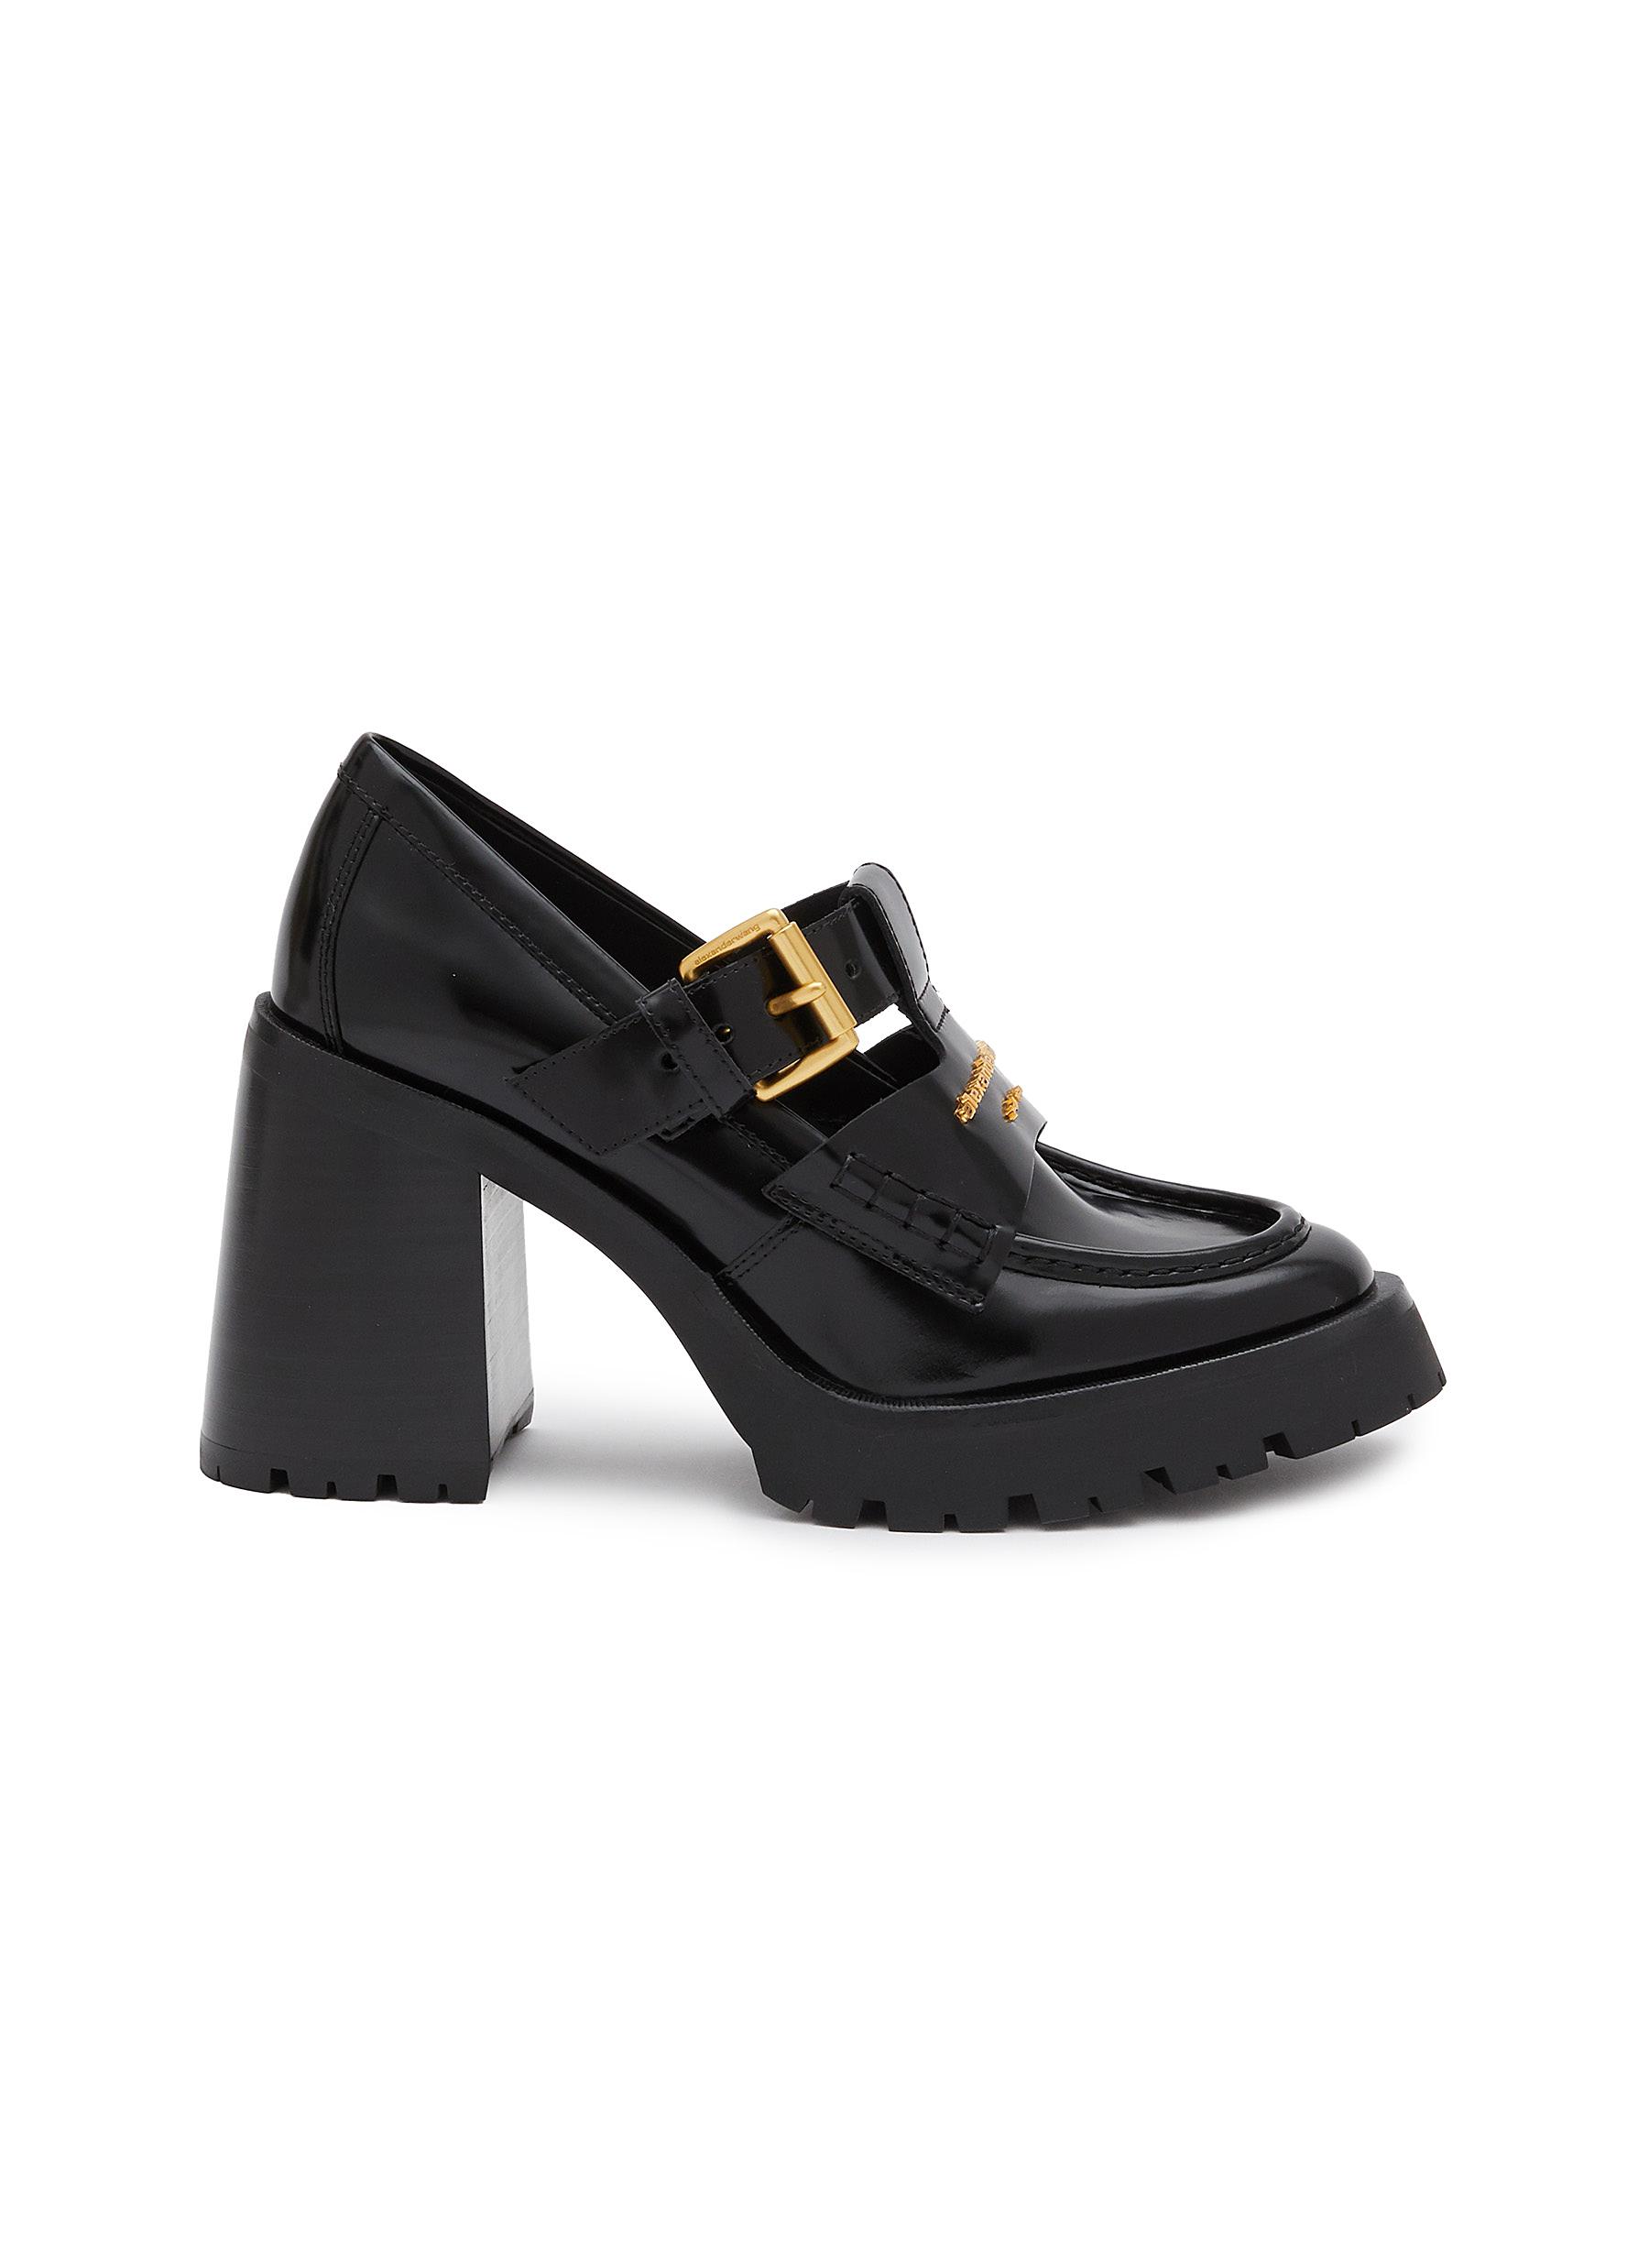 Carter 95 Patent Leather Loafer Pumps